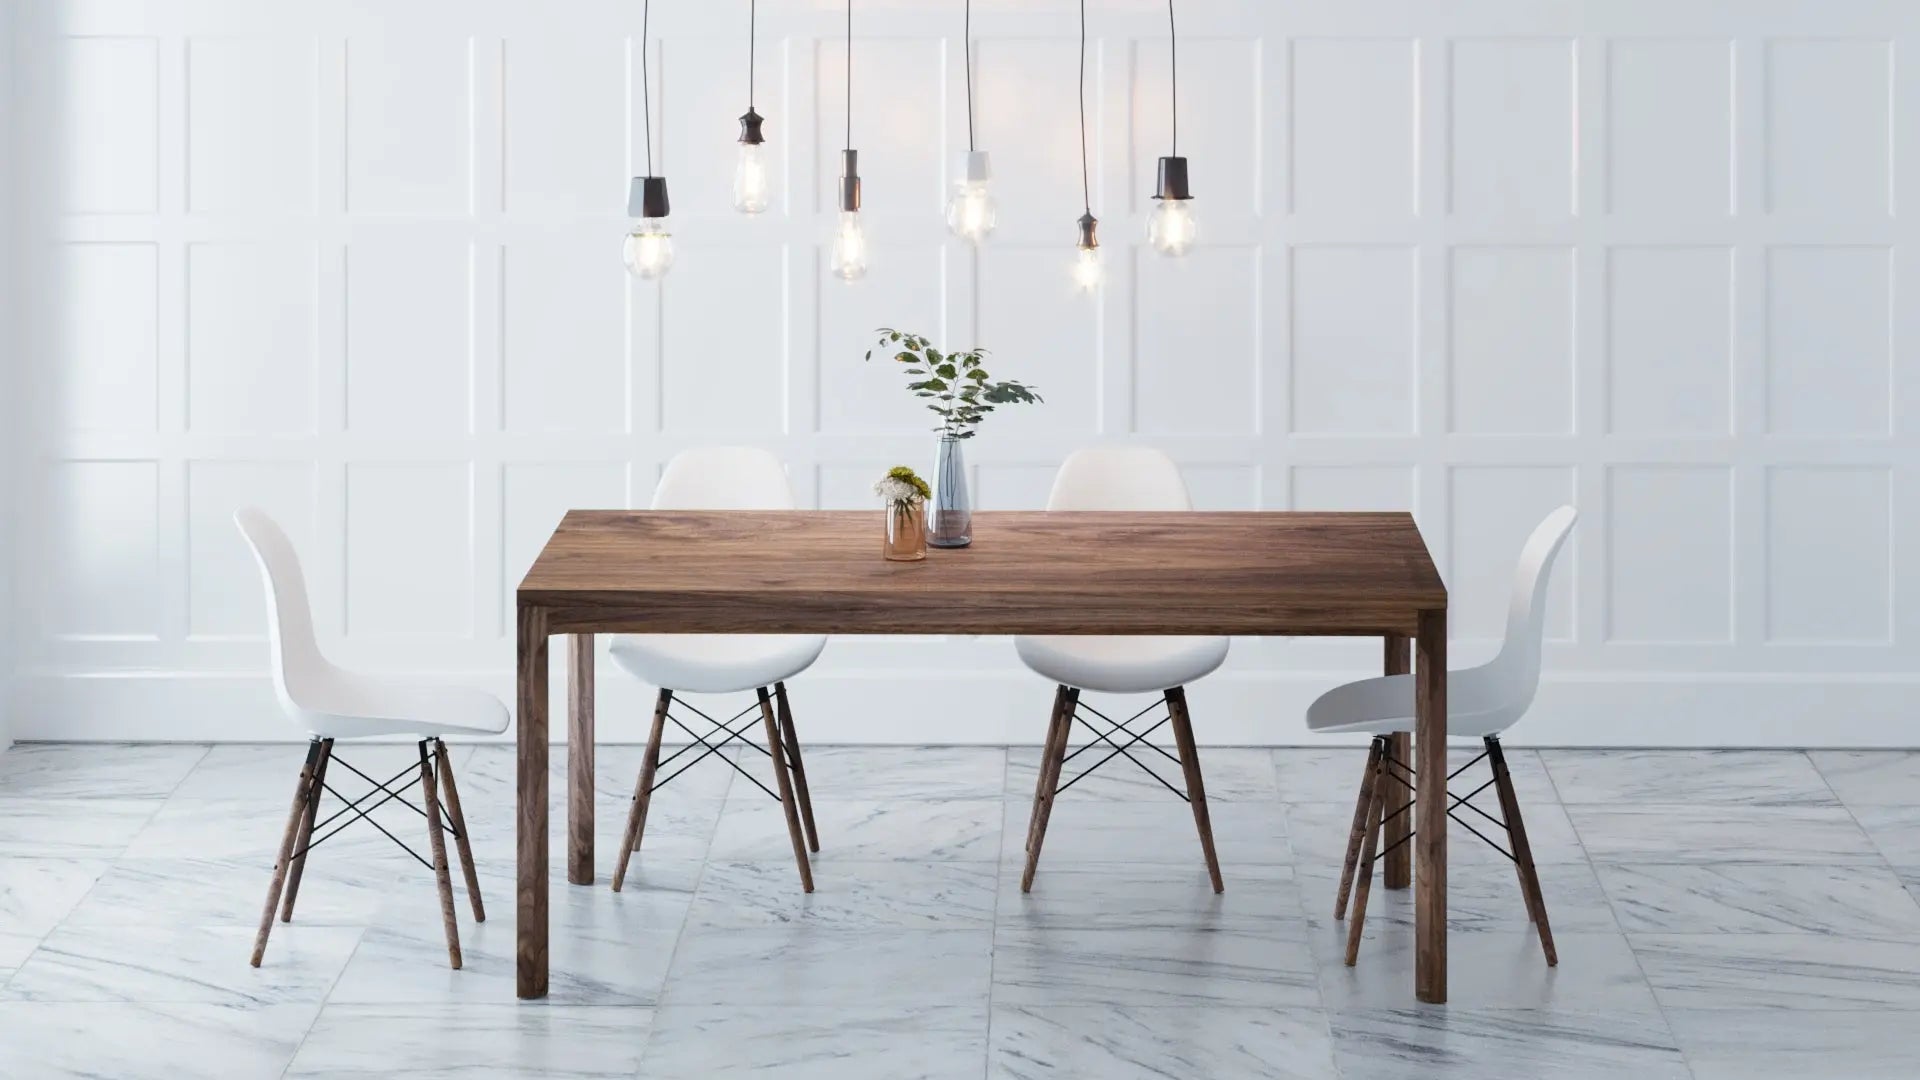 Rustic Minimalist Wooden Extendable Dining Table